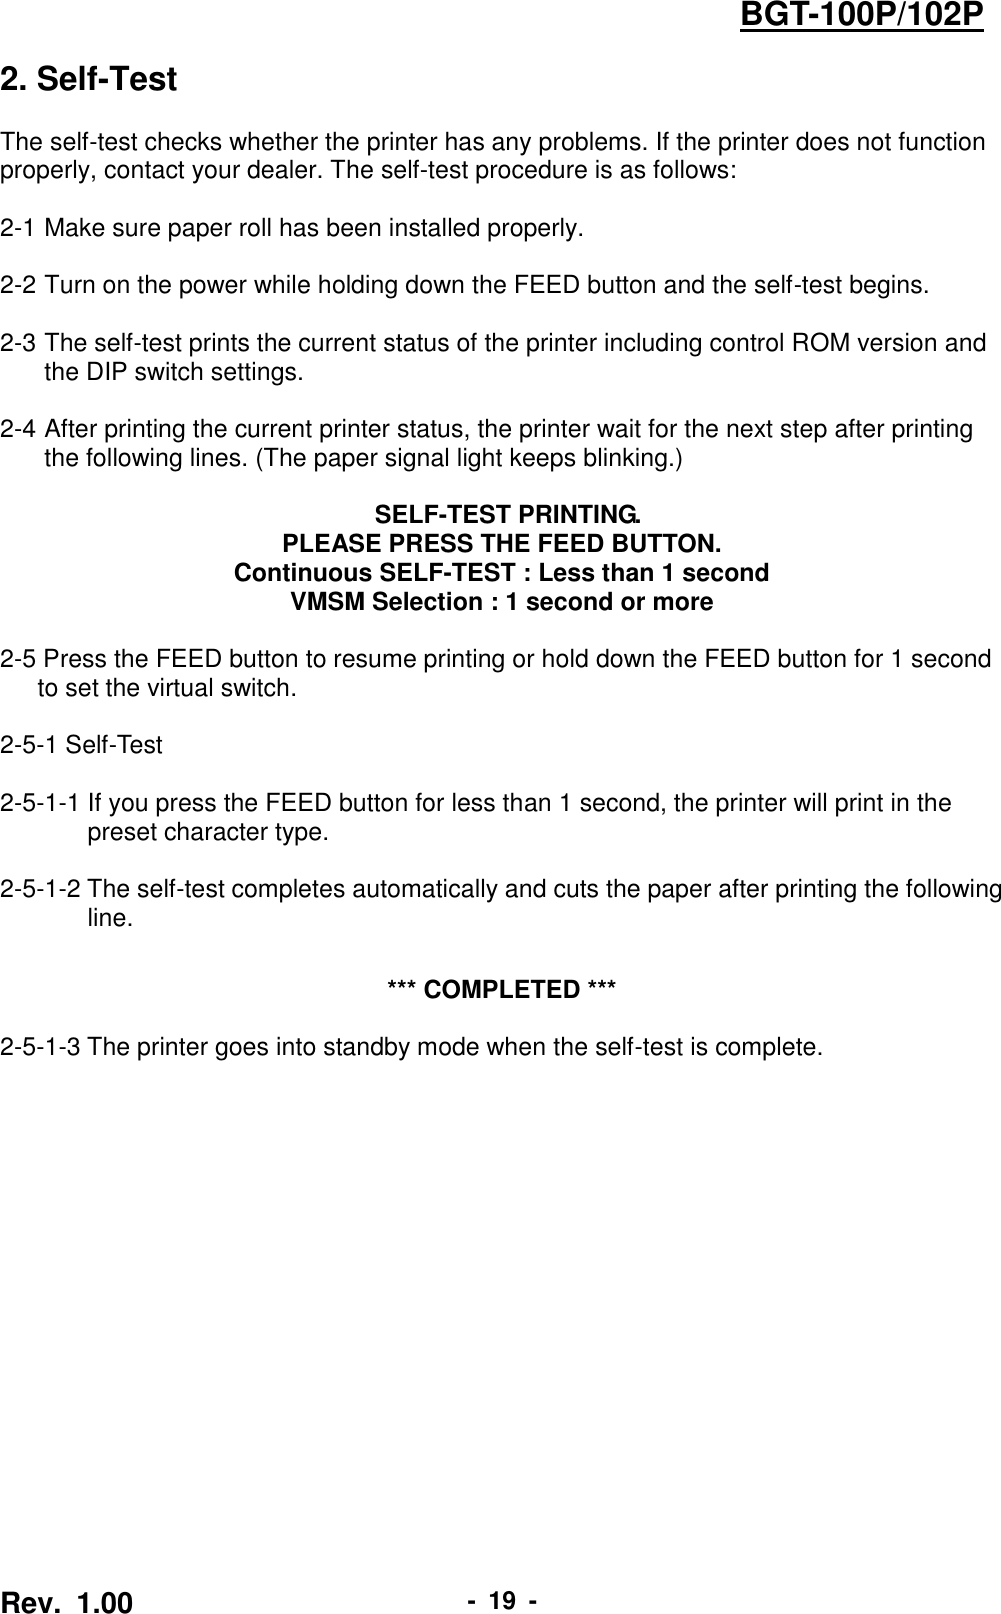  Rev.  1.00 -  19  - BGT-100P/102P 2. Self-Test  The self-test checks whether the printer has any problems. If the printer does not function properly, contact your dealer. The self-test procedure is as follows:  2-1 Make sure paper roll has been installed properly.  2-2 Turn on the power while holding down the FEED button and the self-test begins.  2-3 The self-test prints the current status of the printer including control ROM version and the DIP switch settings.  2-4 After printing the current printer status, the printer wait for the next step after printing the following lines. (The paper signal light keeps blinking.)   SELF-TEST PRINTING. PLEASE PRESS THE FEED BUTTON. Continuous SELF-TEST : Less than 1 second VMSM Selection : 1 second or more  2-5 Press the FEED button to resume printing or hold down the FEED button for 1 second   to set the virtual switch.    2-5-1 Self-Test    2-5-1-1 If you press the FEED button for less than 1 second, the printer will print in the   preset character type.    2-5-1-2 The self-test completes automatically and cuts the paper after printing the following   line.   *** COMPLETED ***  2-5-1-3 The printer goes into standby mode when the self-test is complete.  